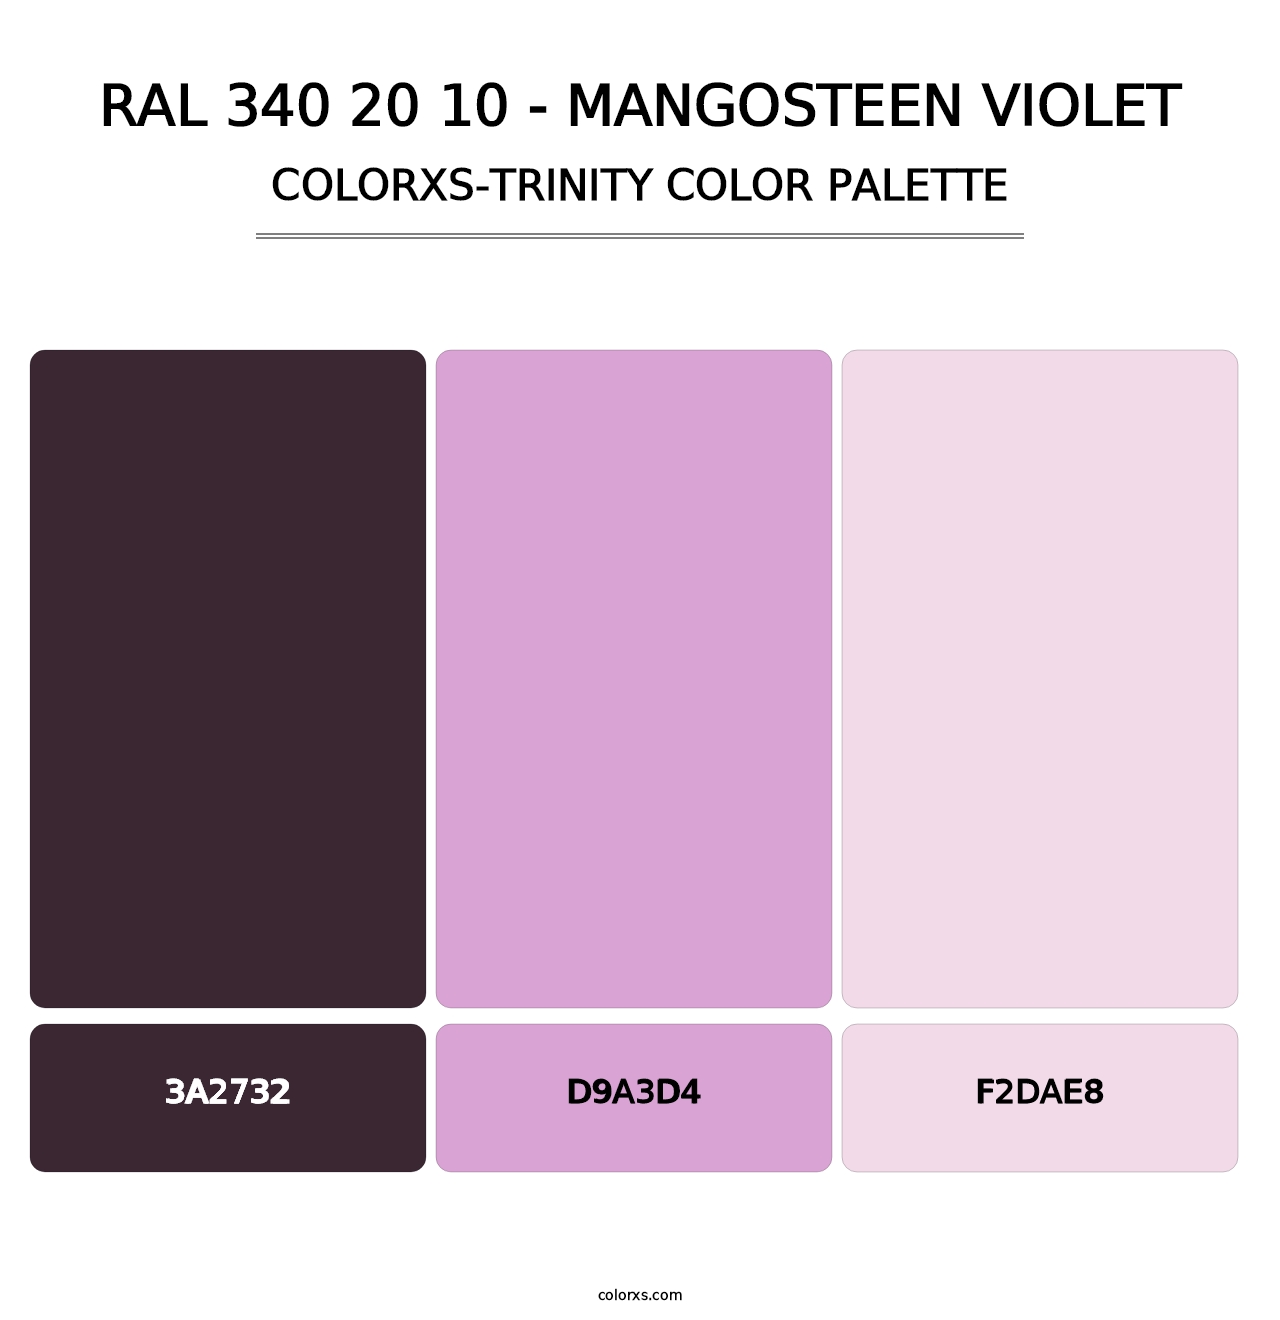 RAL 340 20 10 - Mangosteen Violet - Colorxs Trinity Palette